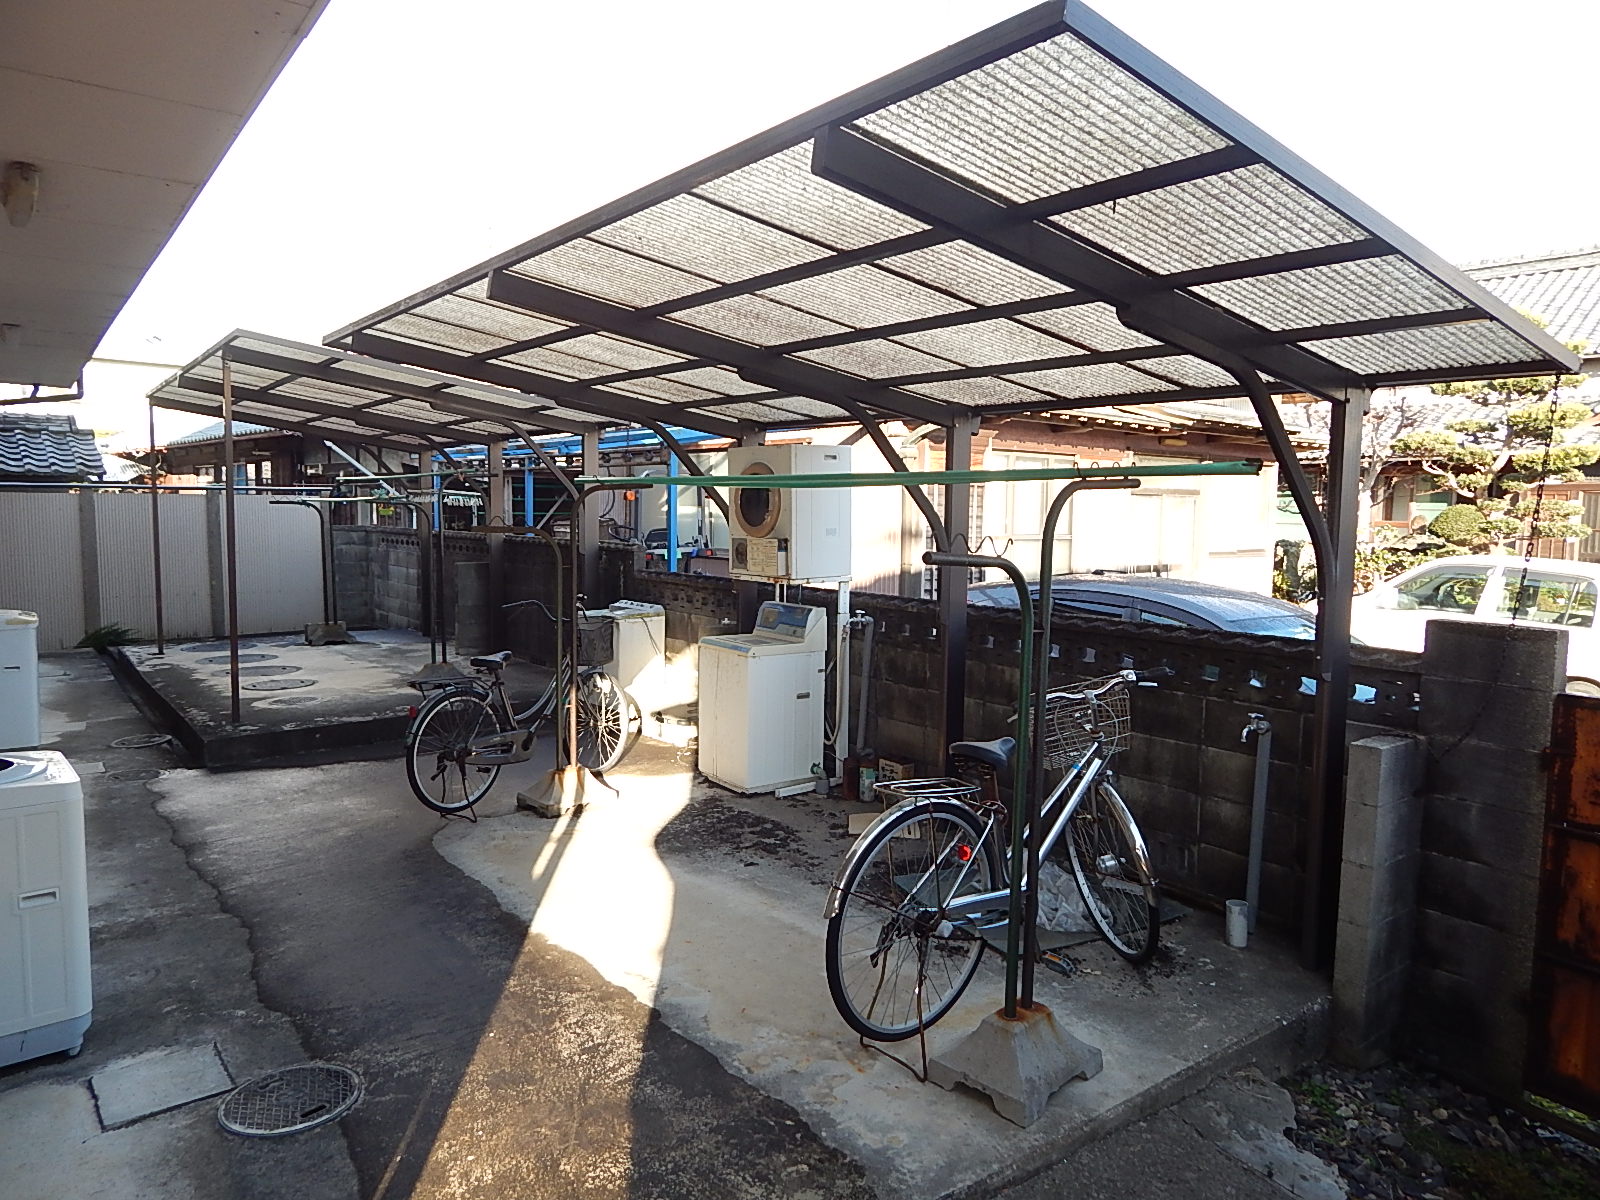 Other common areas. Happy bicycle parking lot with